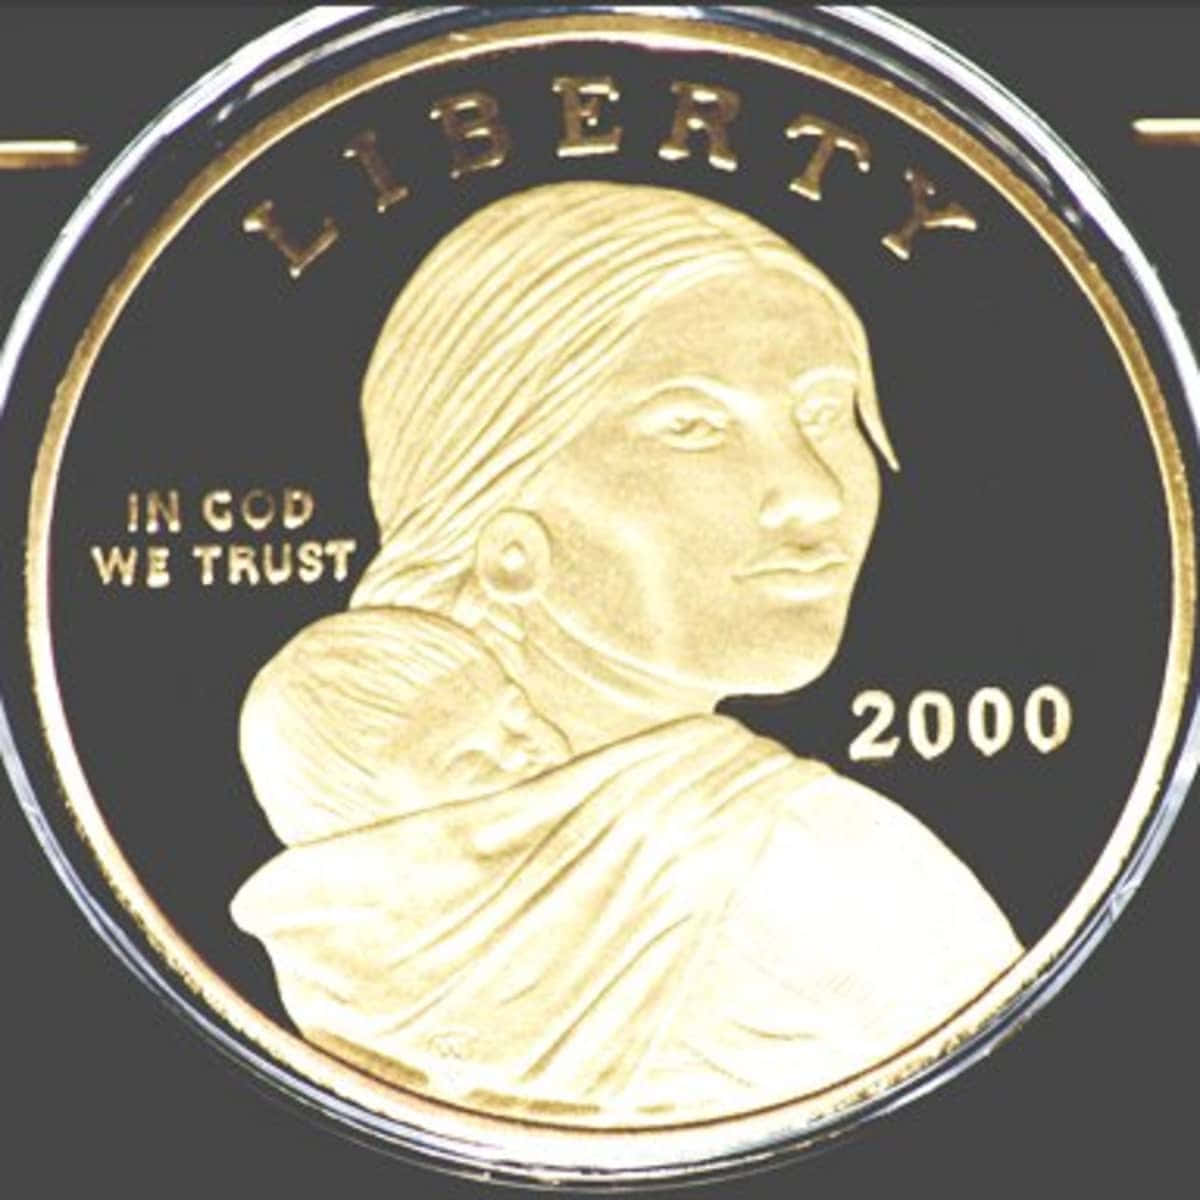 A Gold Coin With An Image Of An Indian Woman